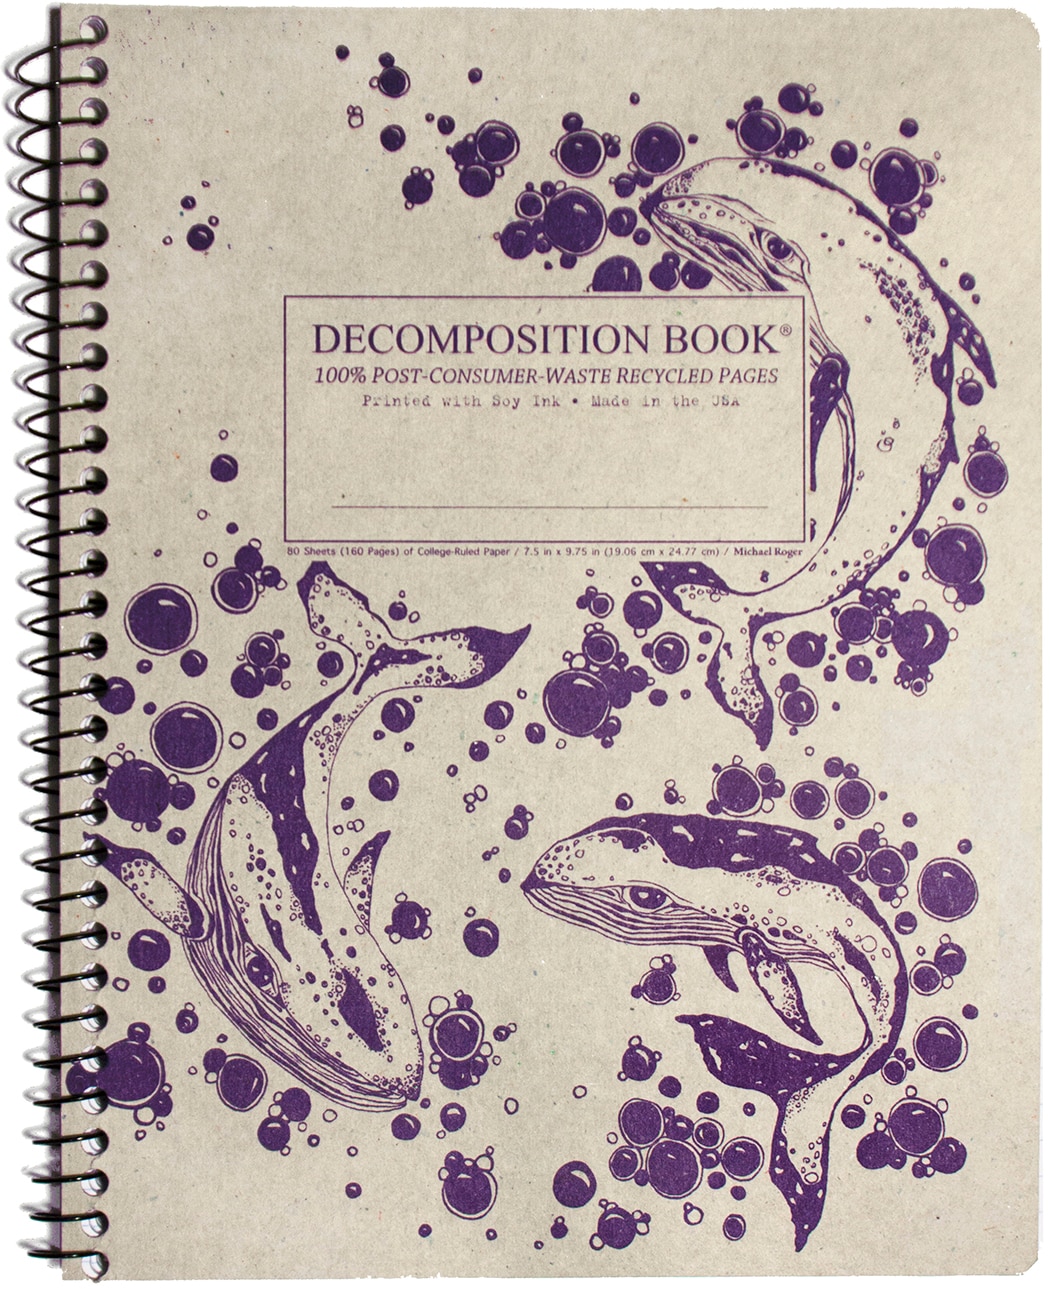 Humpback Whales Coilbound Decomposition Notebook